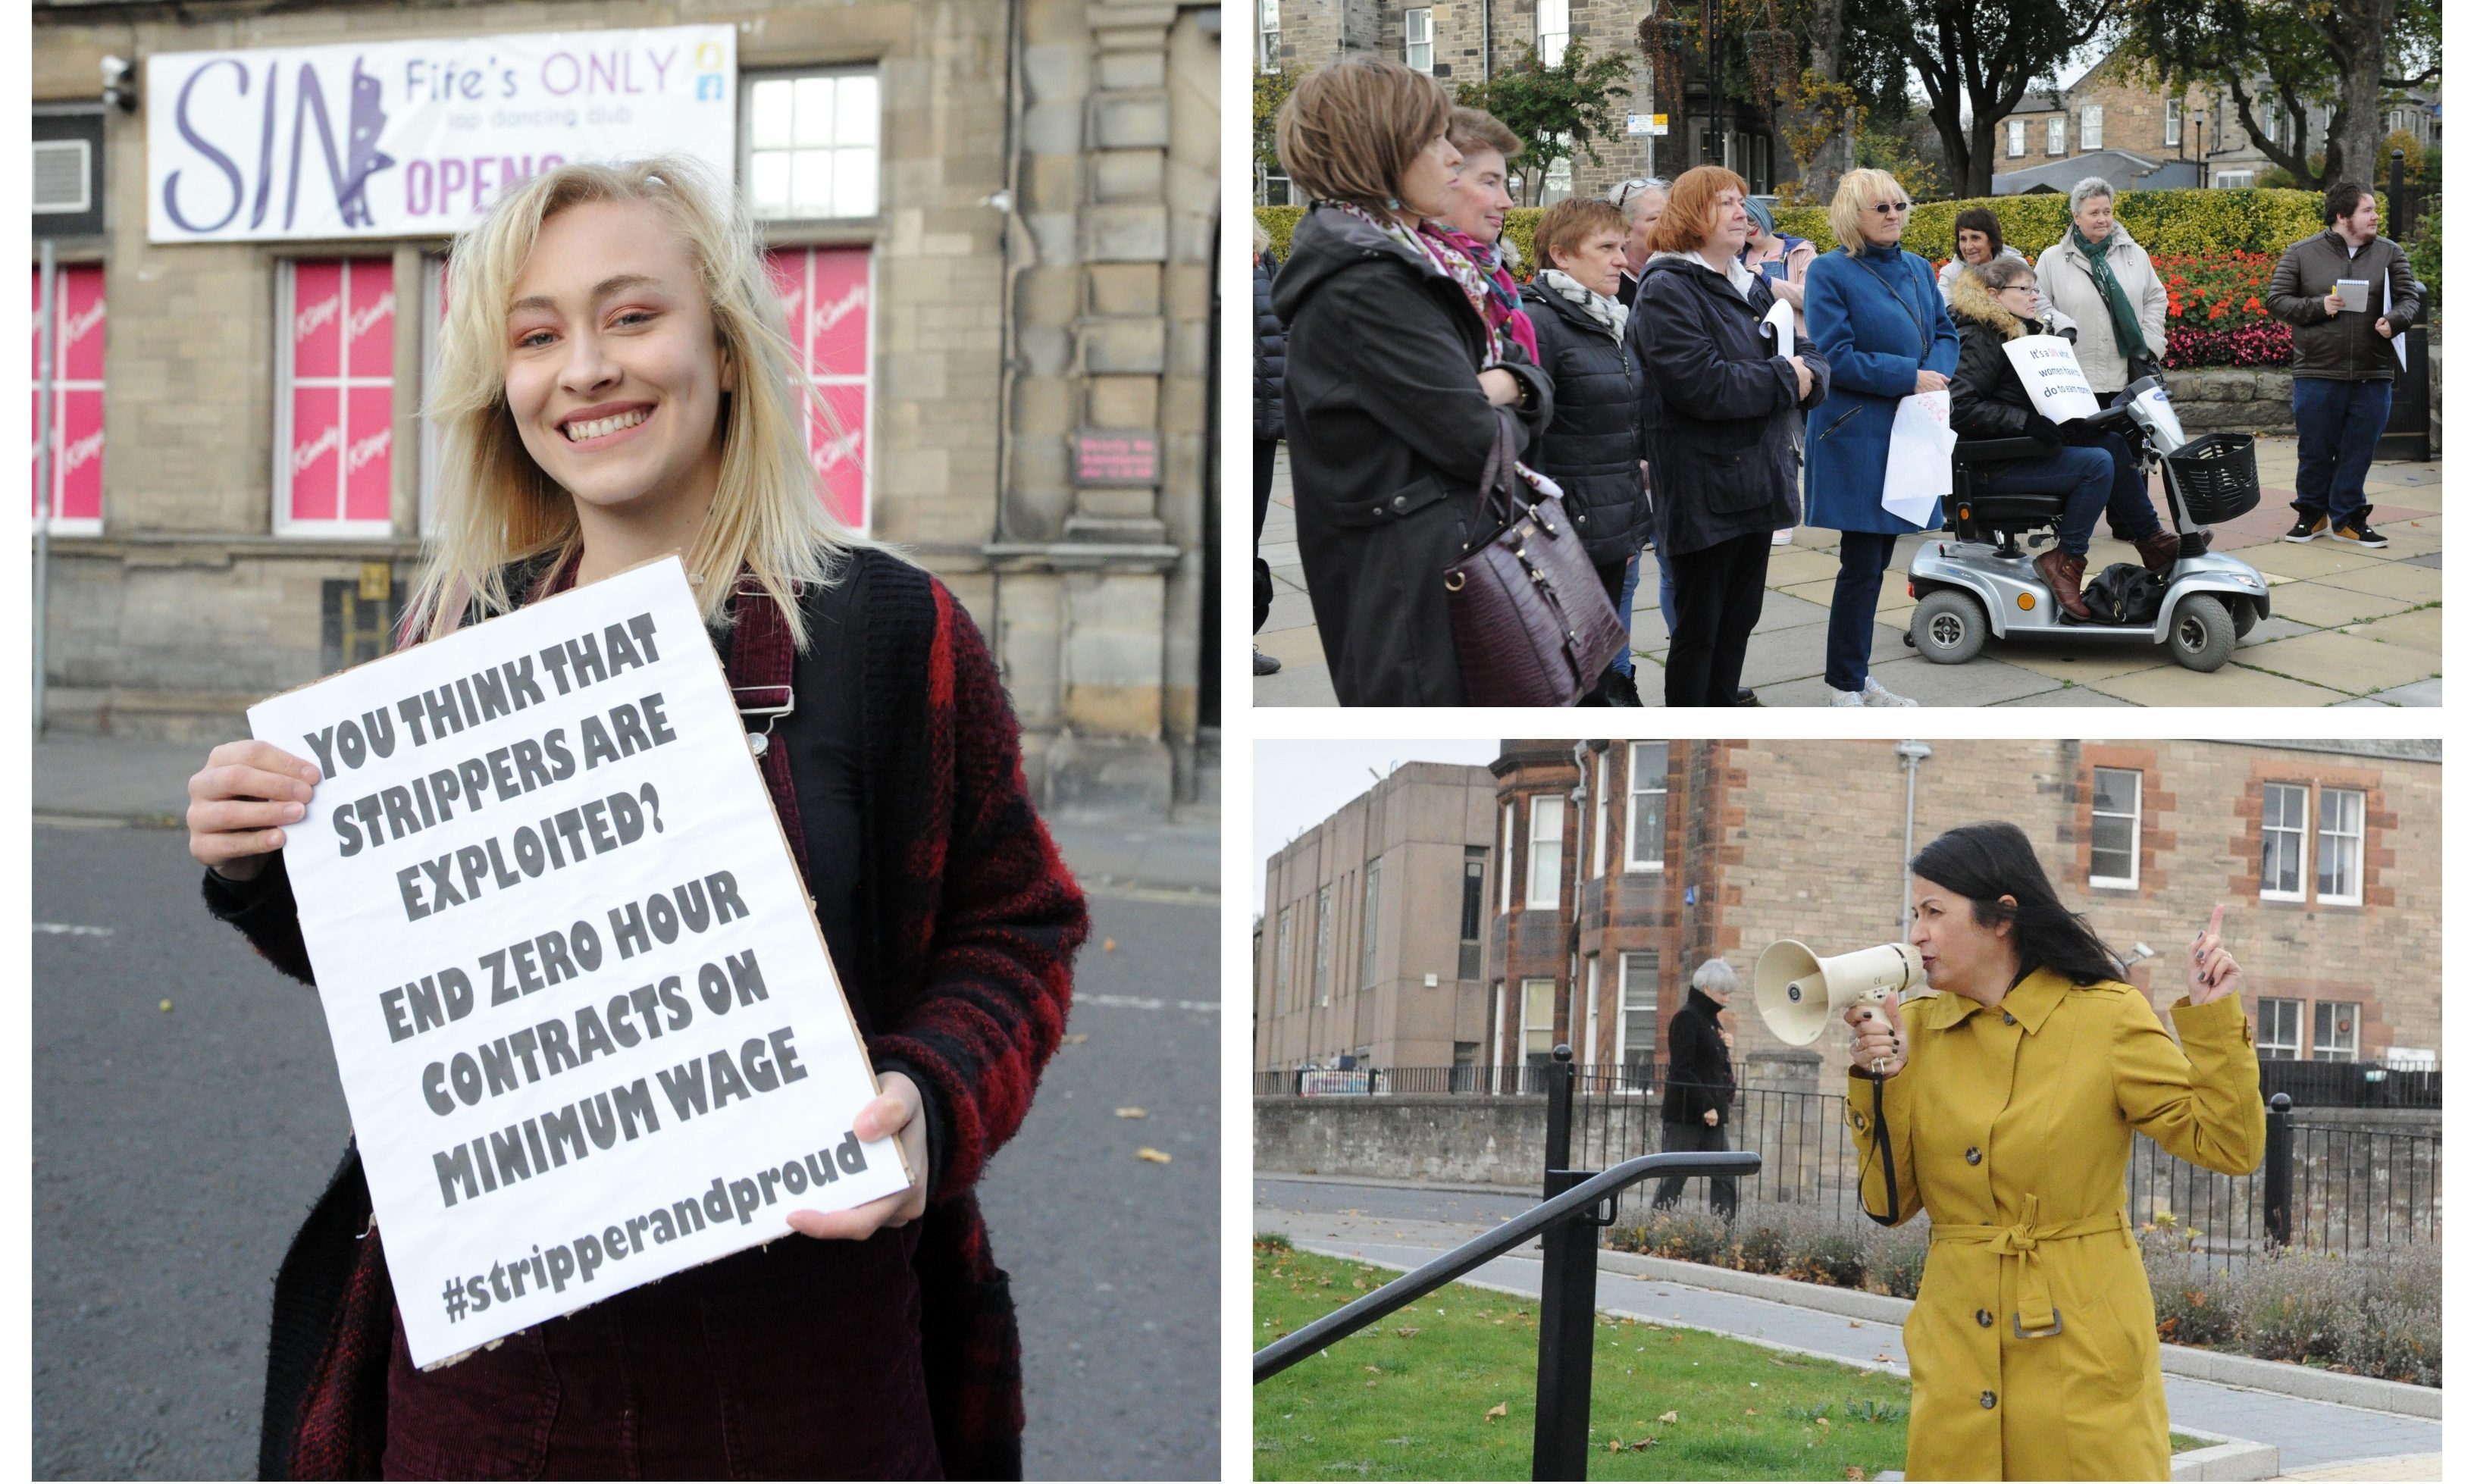 Protesters demonstrated against the Kirkcaldy strip club, and were met by counter-protesters.